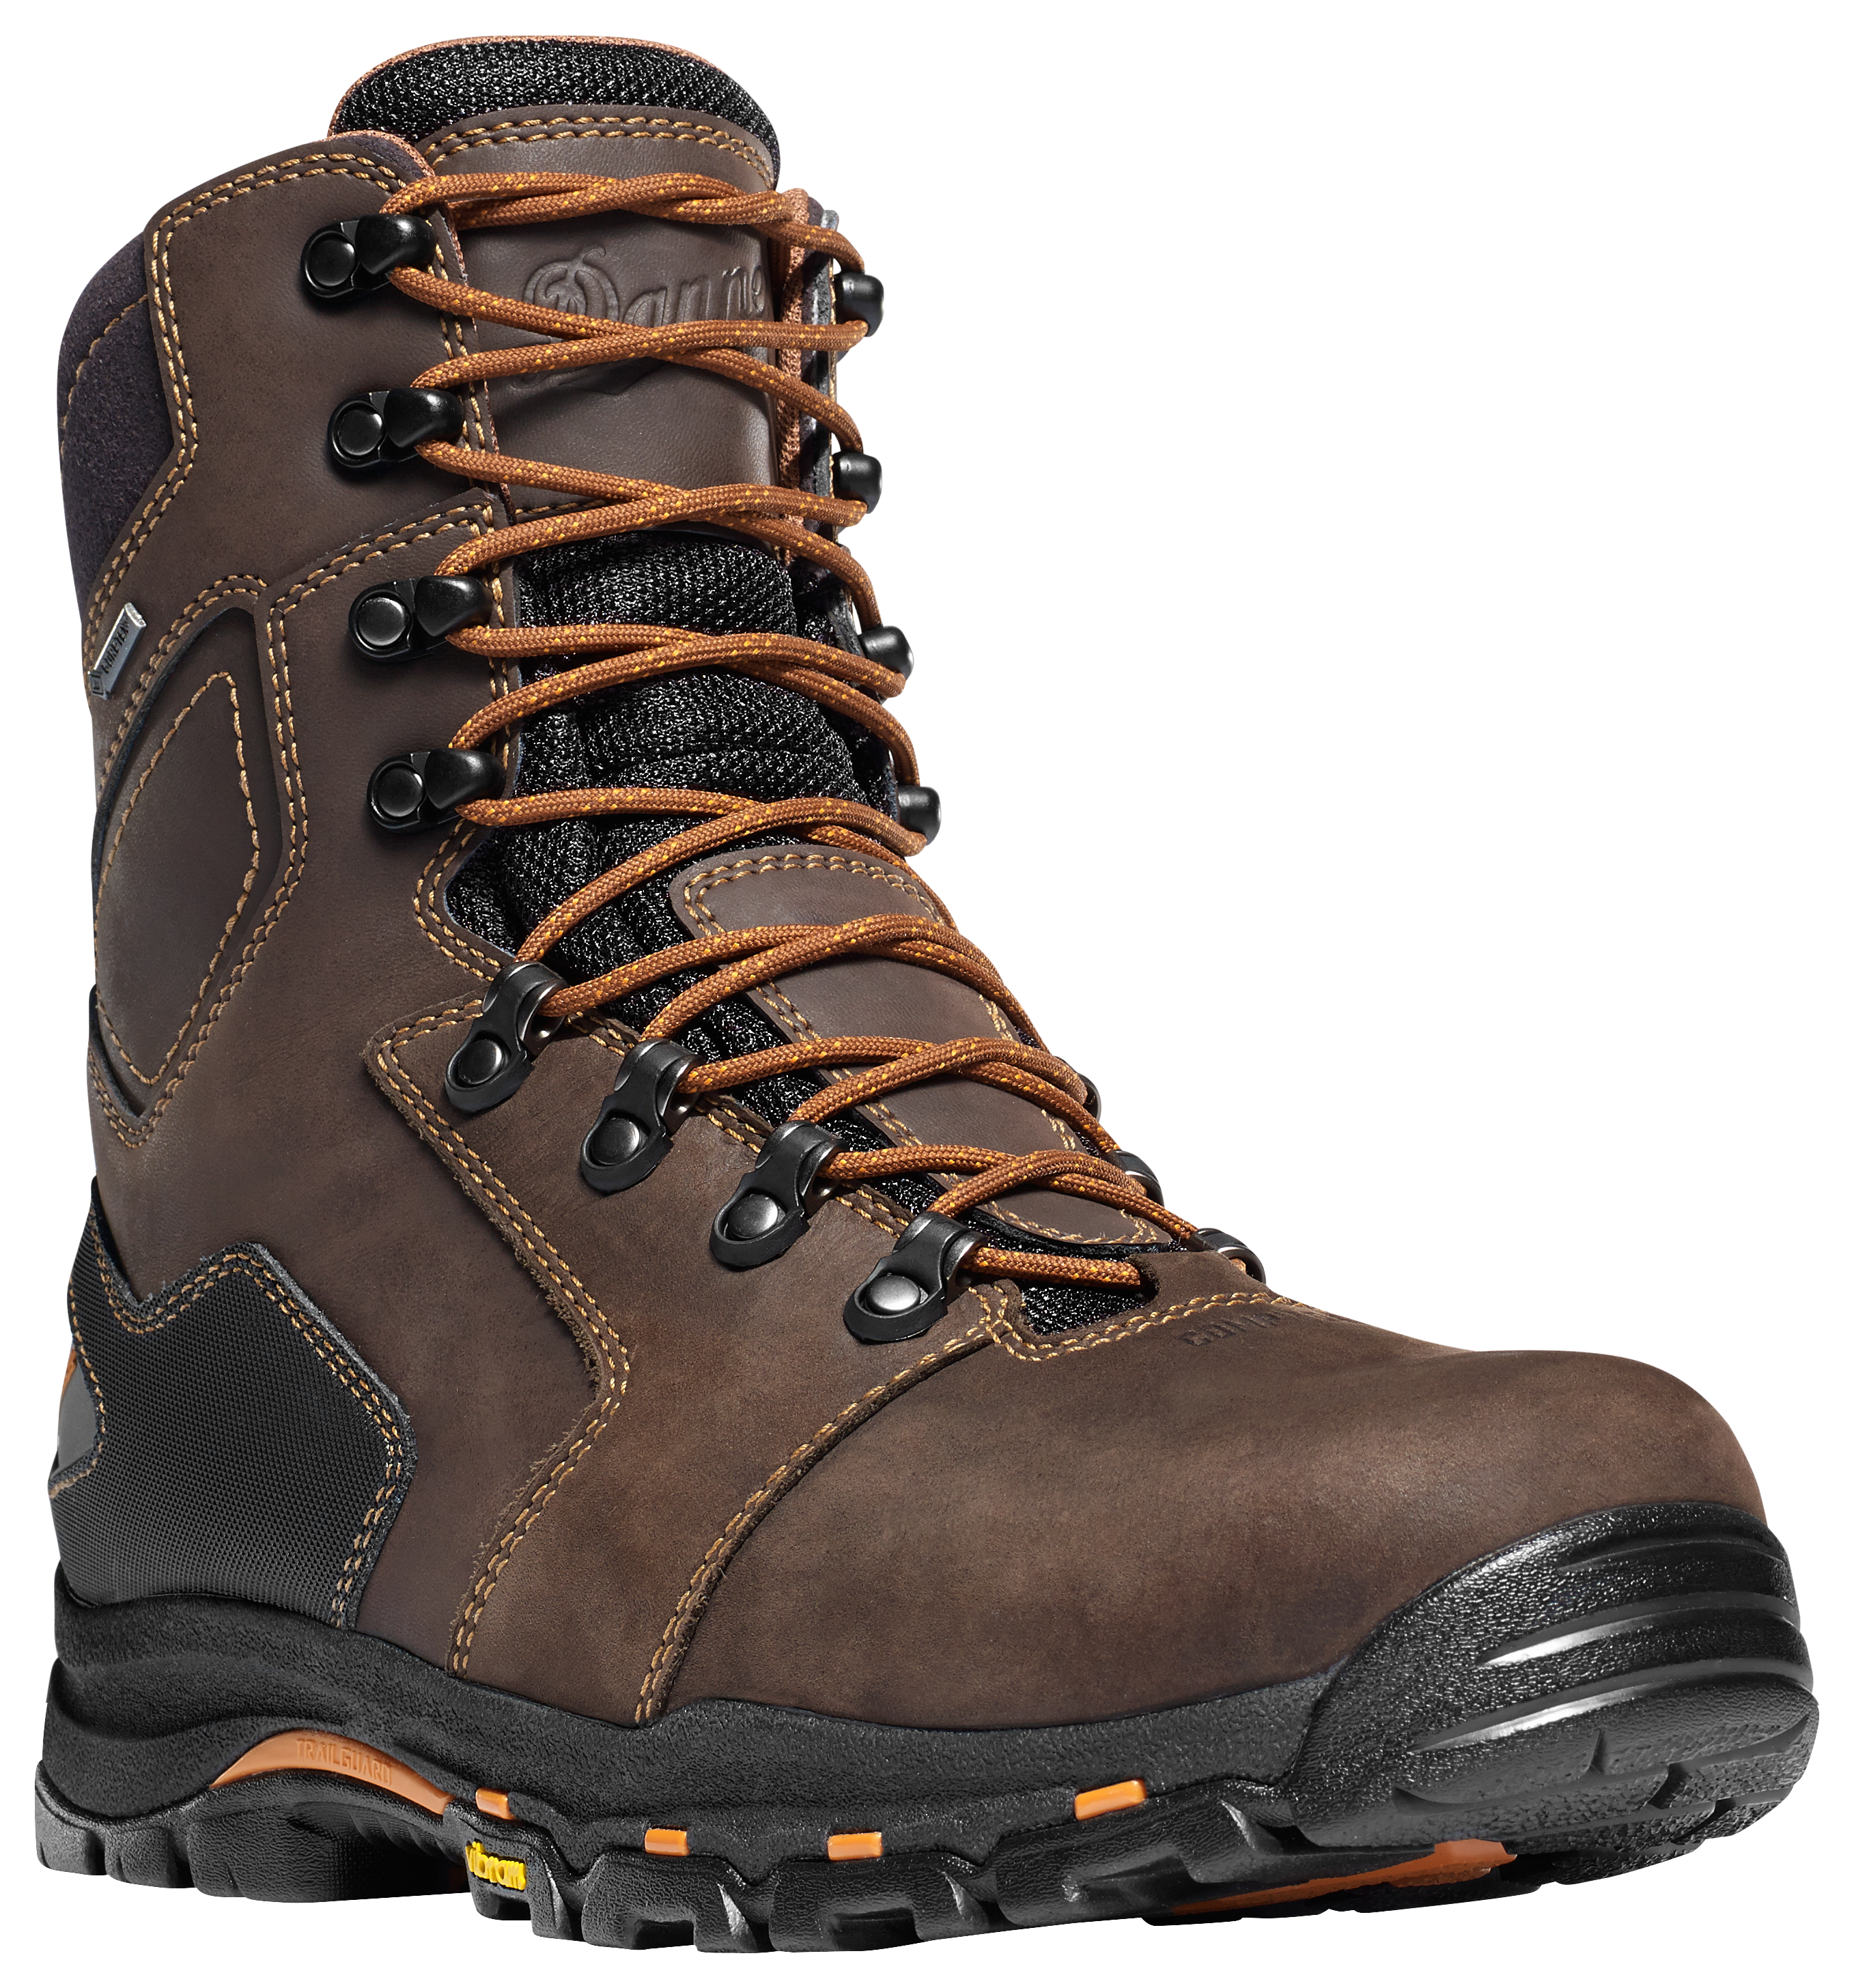 Danner Vicious GORE-TEX Composite Toe Work Boots for Men - Brown - 10W